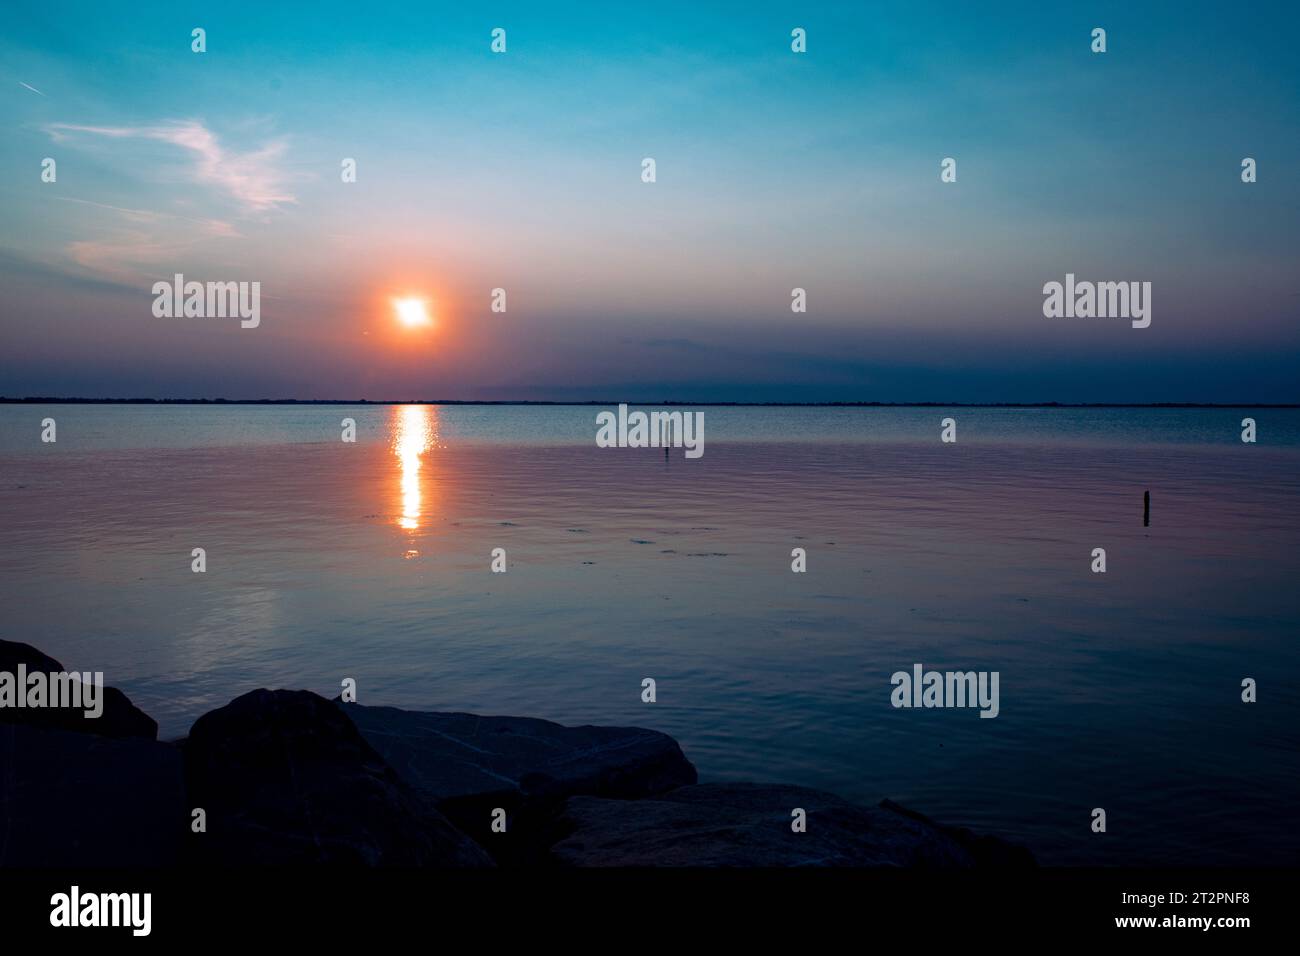 Sunset blue hour on a lake Stock Photo